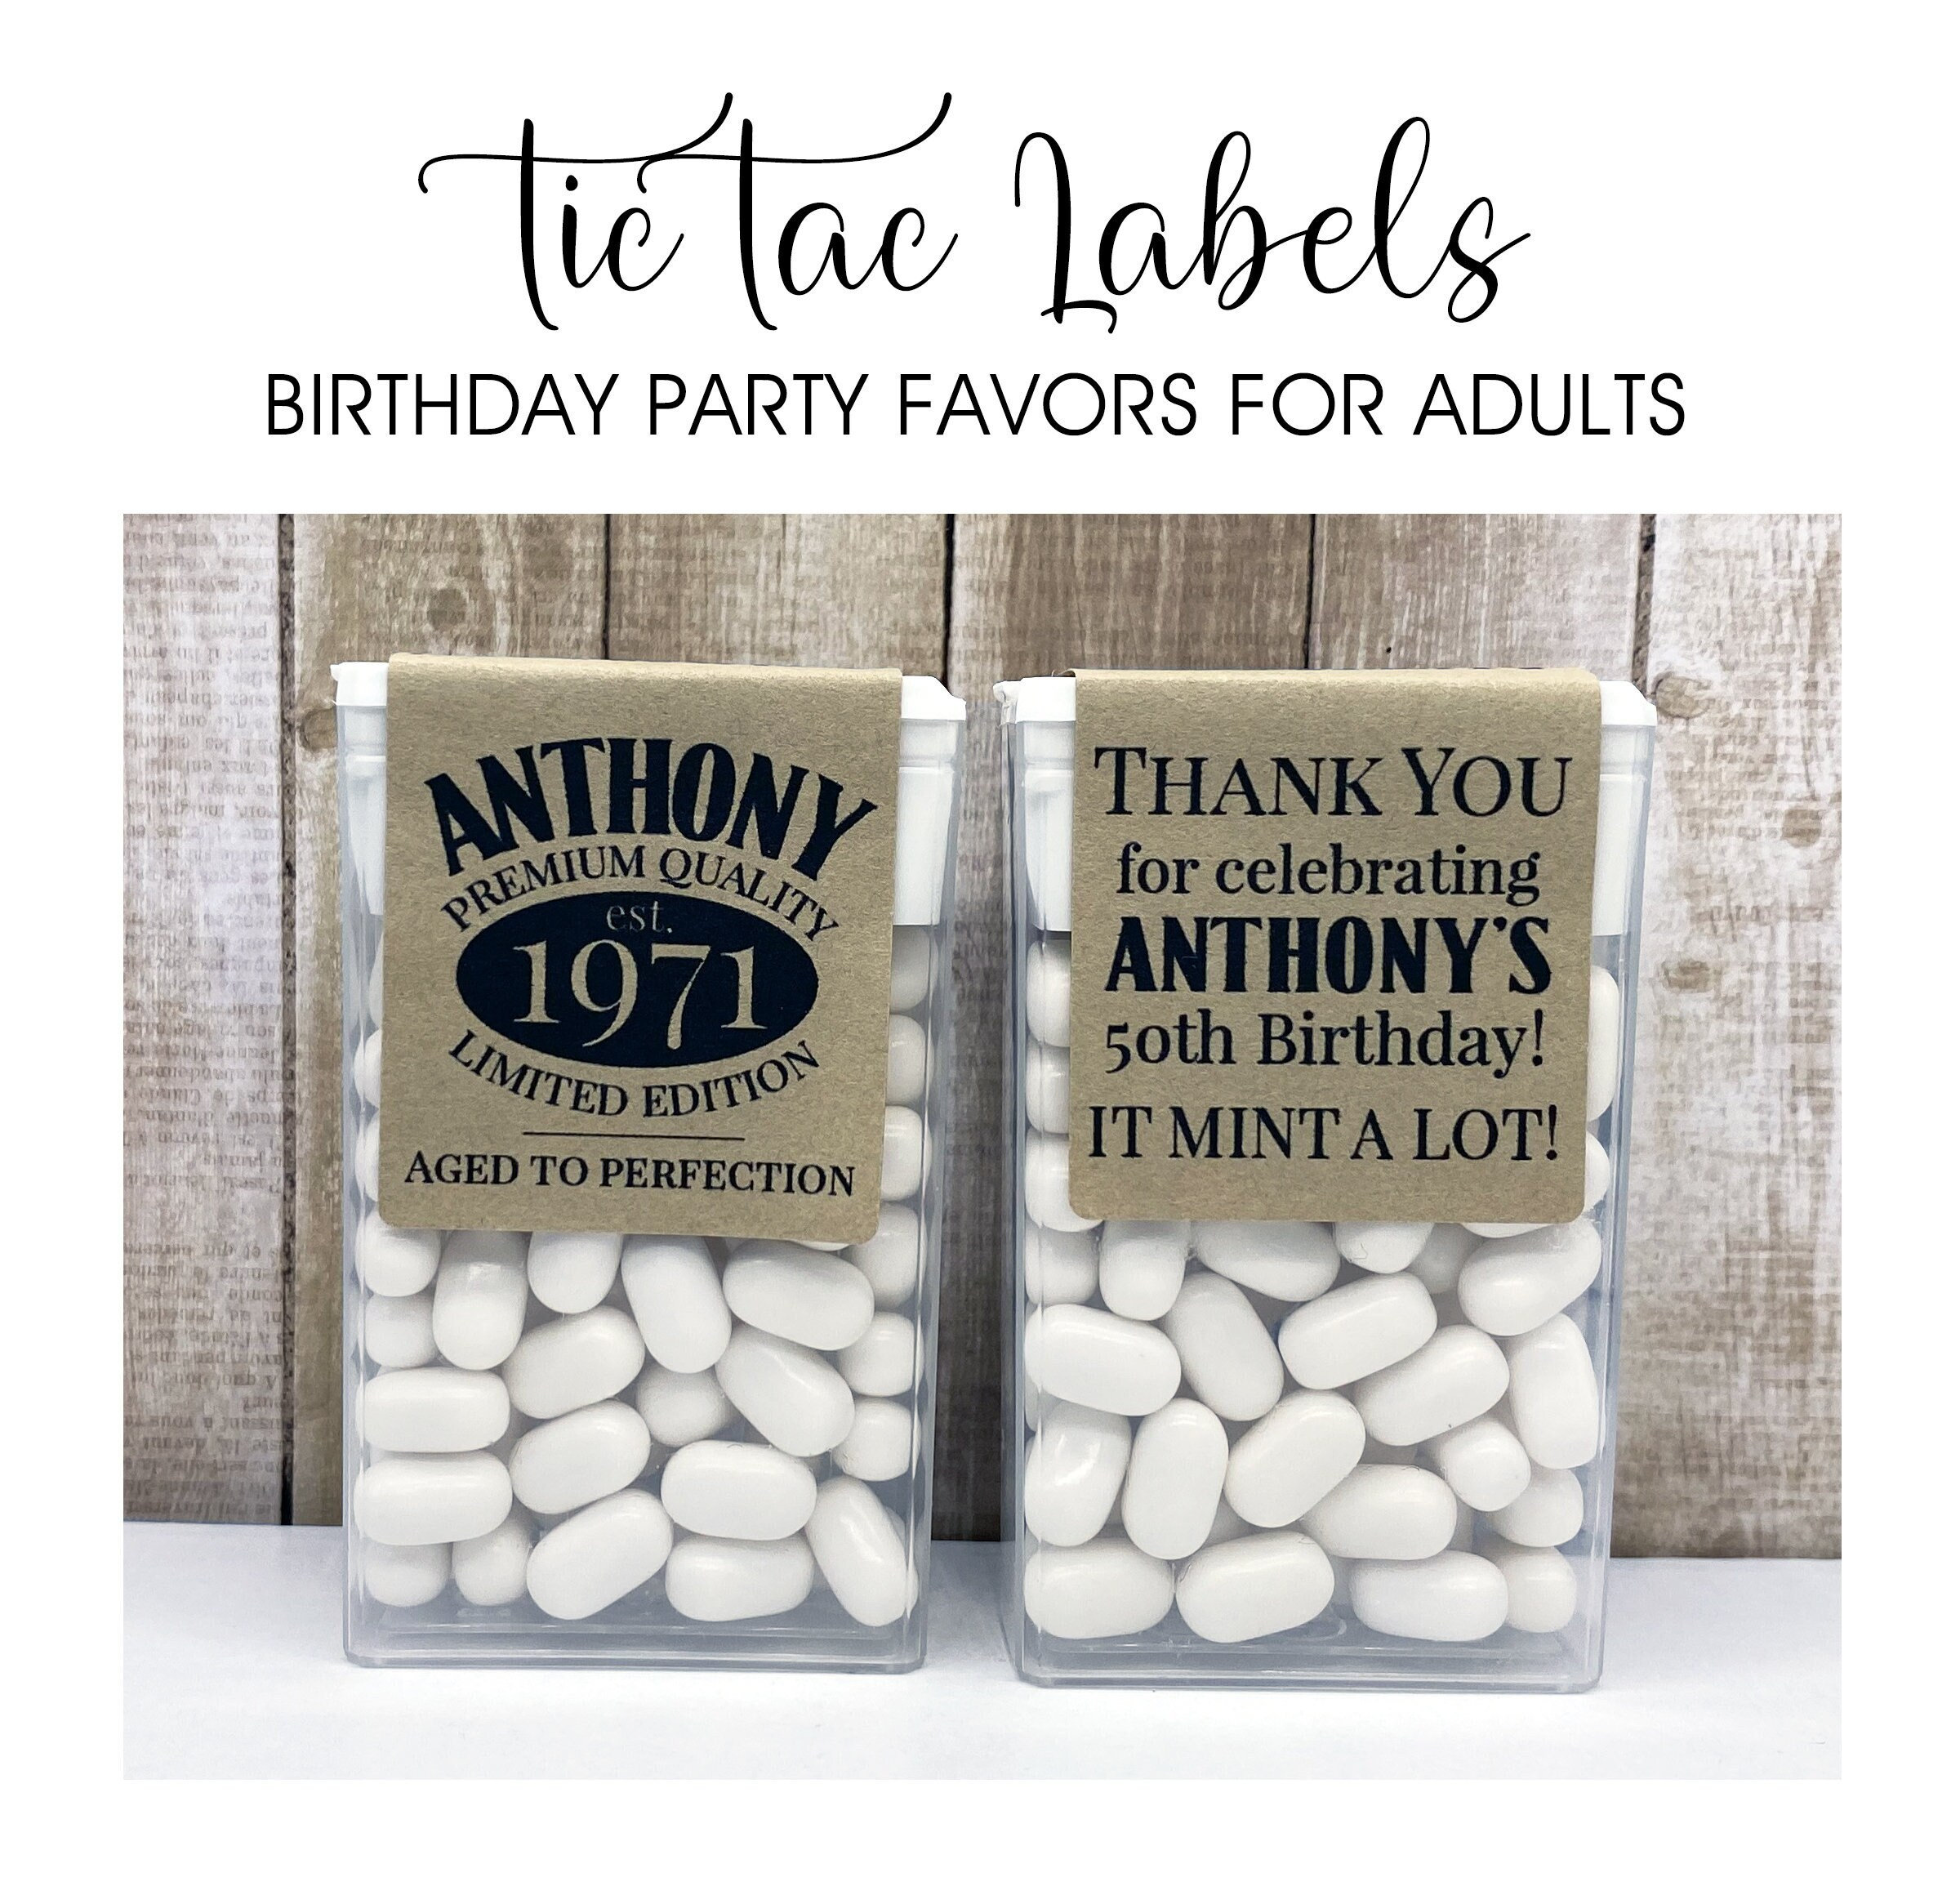 Birthday Party Favors for Adults, Personalized Adult Birthday Party Favors